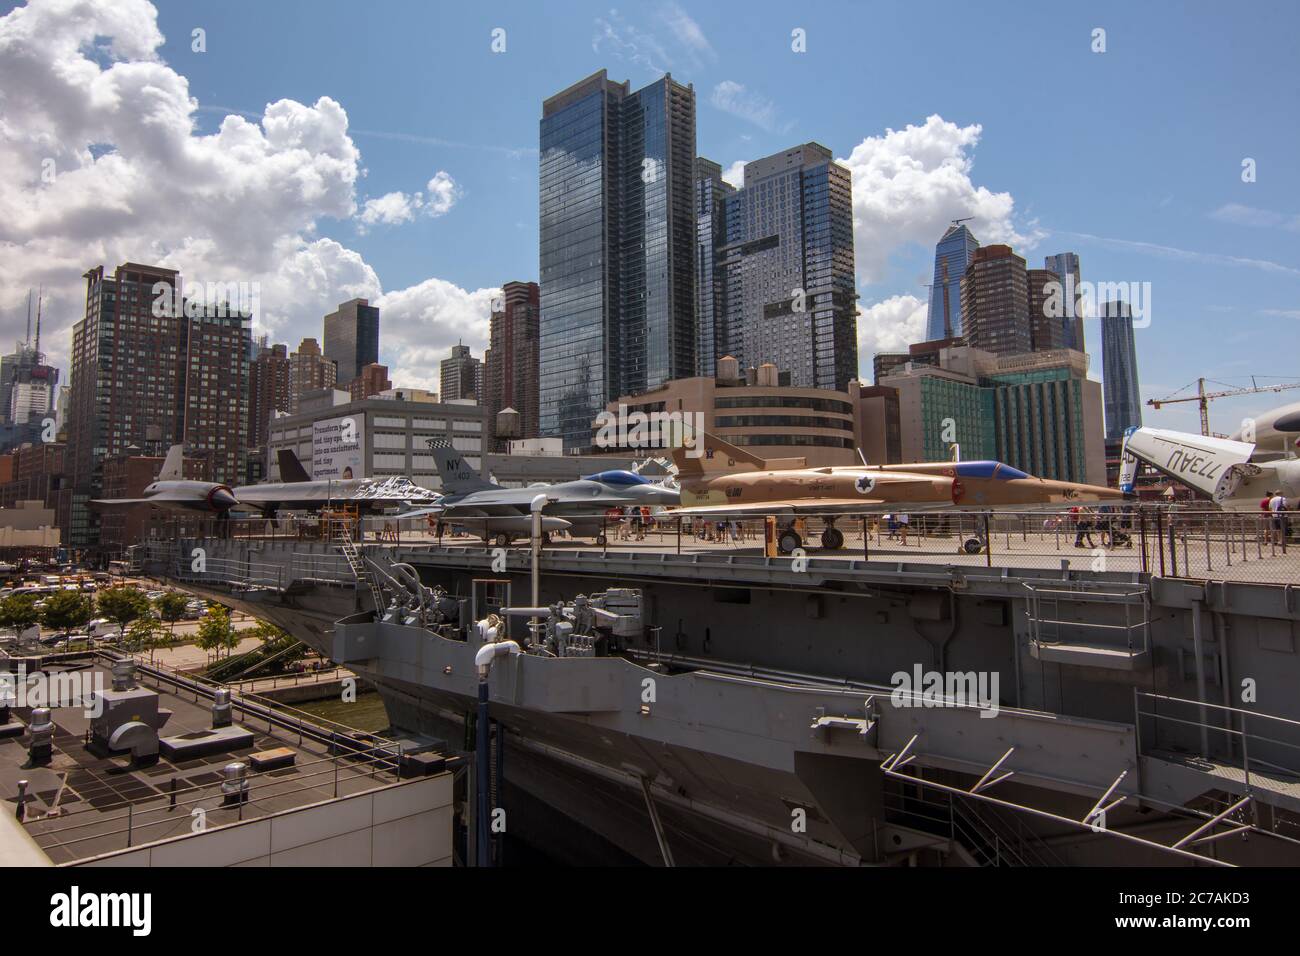 New York, NY / USA - July 24, 2019: Exterior Intrepid Sea Air & Space Museum Stock Photo